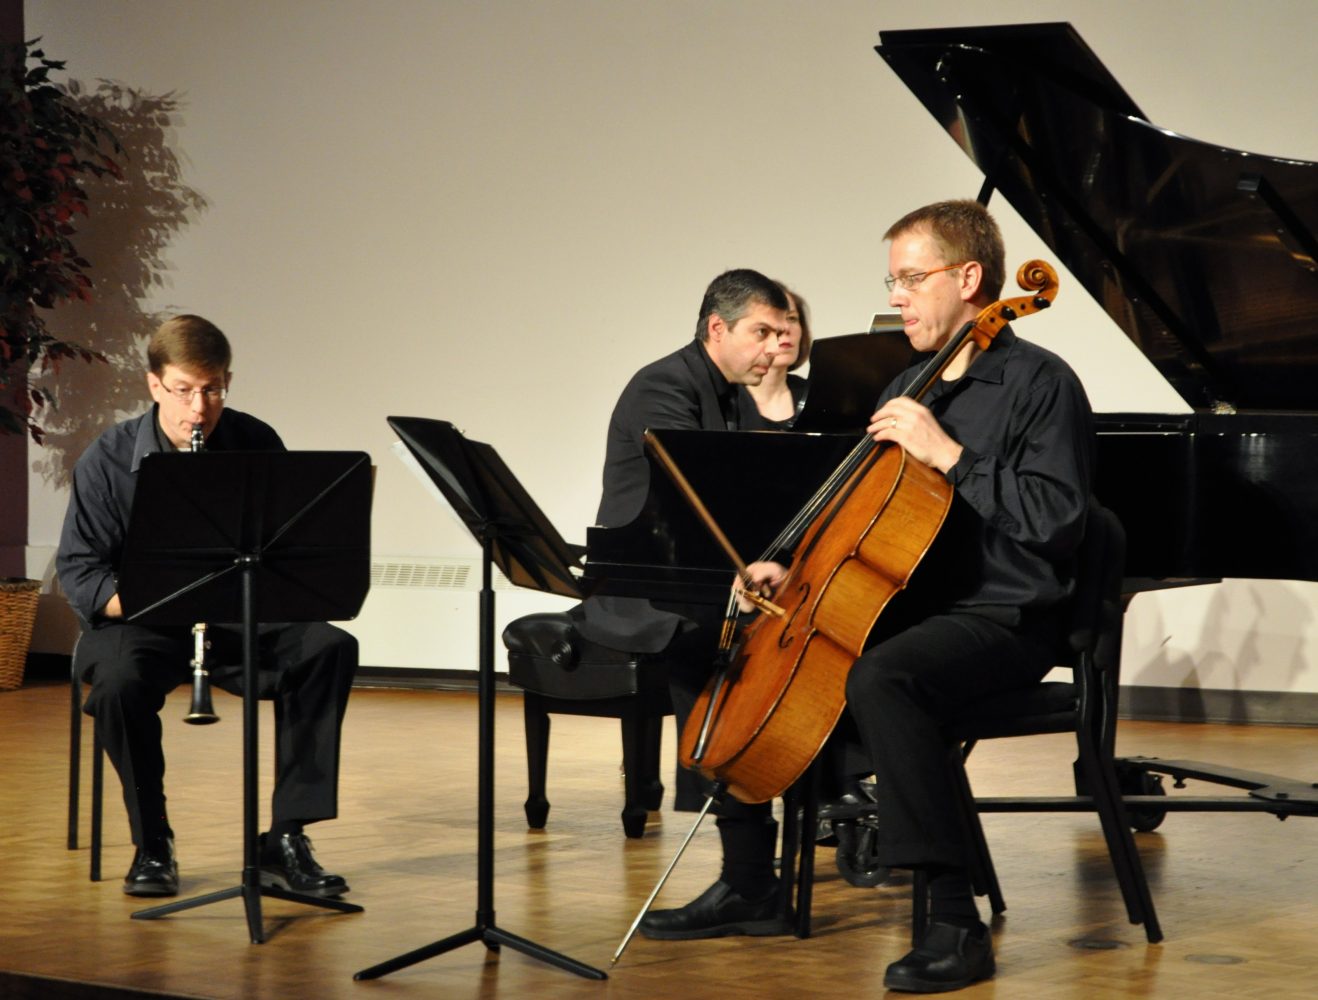 The Truman State University Trio featured performances by Jesse Krebs on the clarinet, Brian Kubin on the cello, and Ilia Radoslavov on the piano.
Bartholome Rondet/Winonan